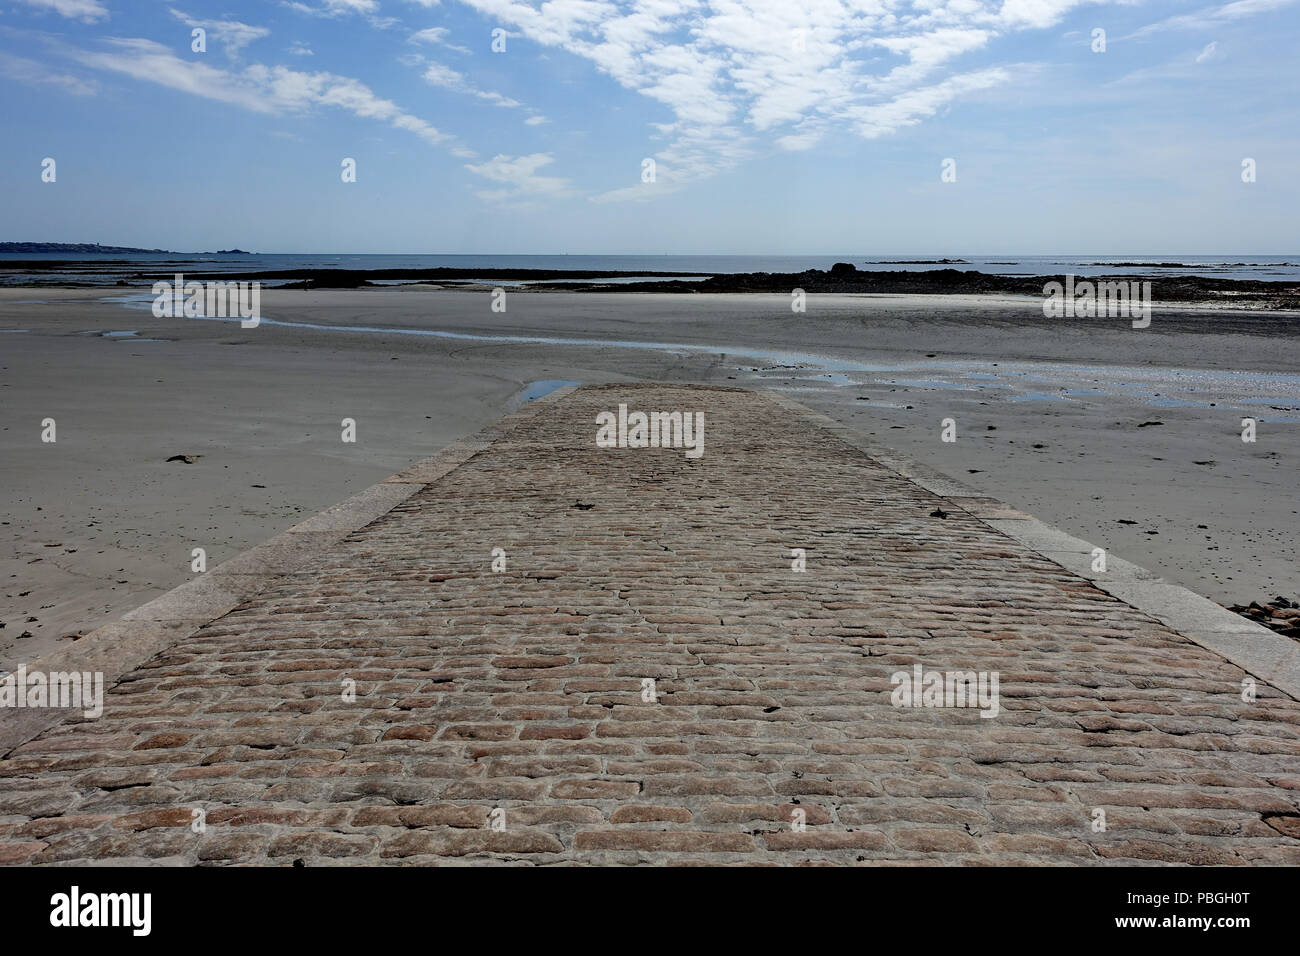 Slip way at St Ouens Bay in Jersey Stock Photo